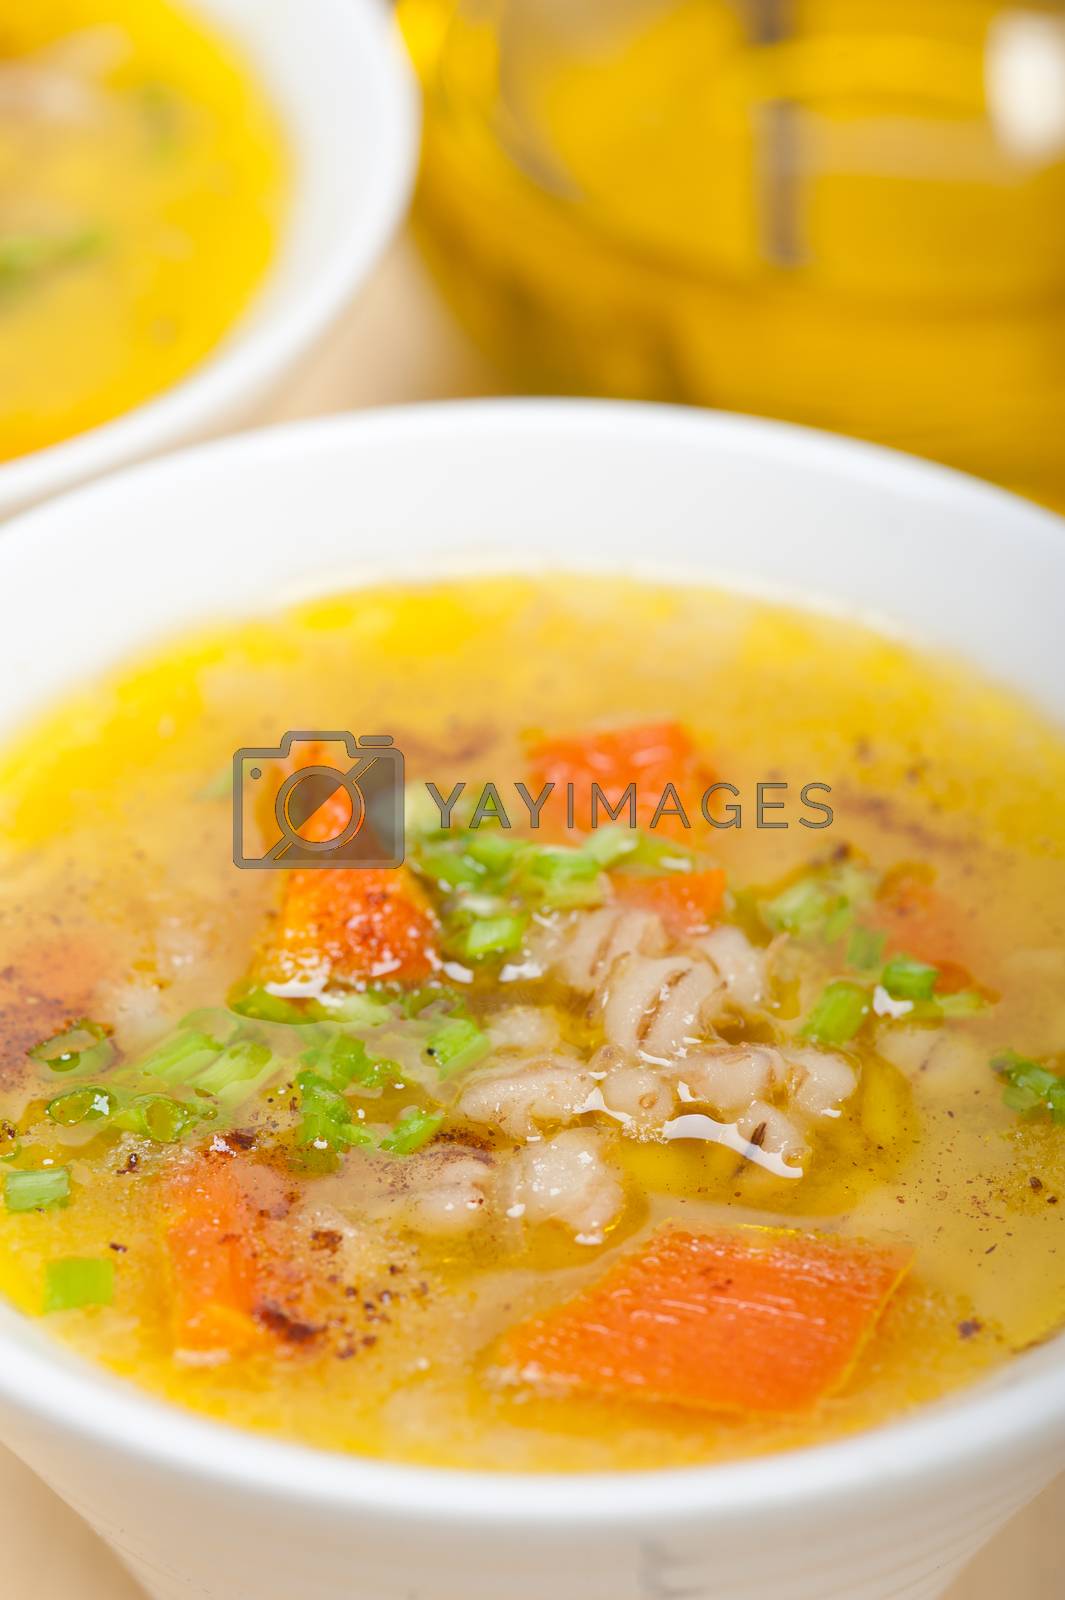 Royalty free image of Syrian barley broth soup Aleppo style by keko64